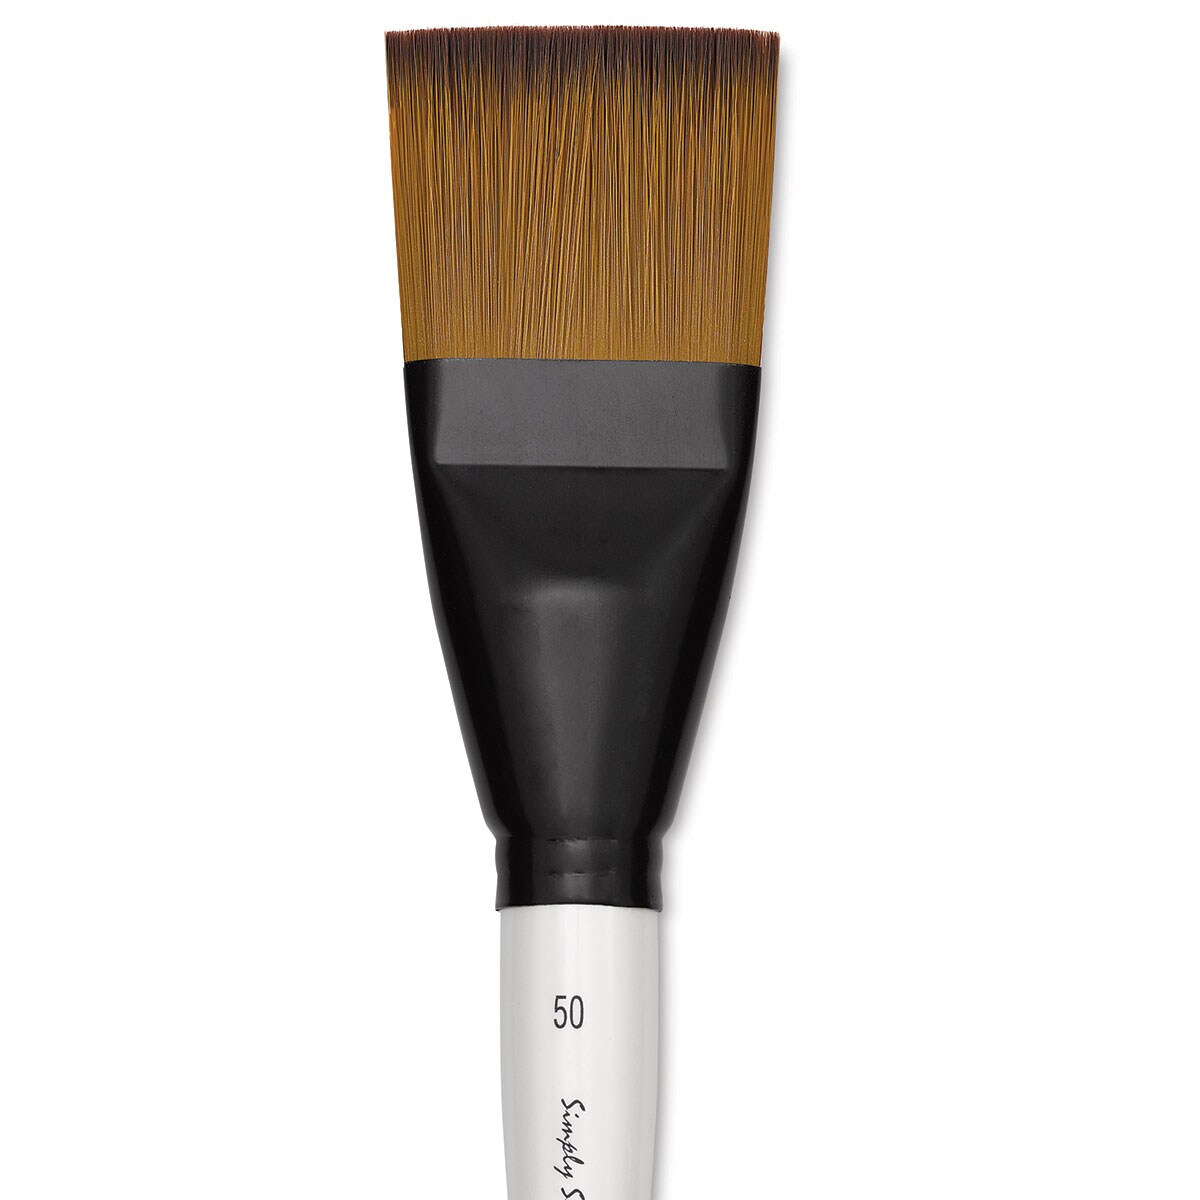 Simply Simmons XL Soft Synthetic Brush - Flat, Size 50